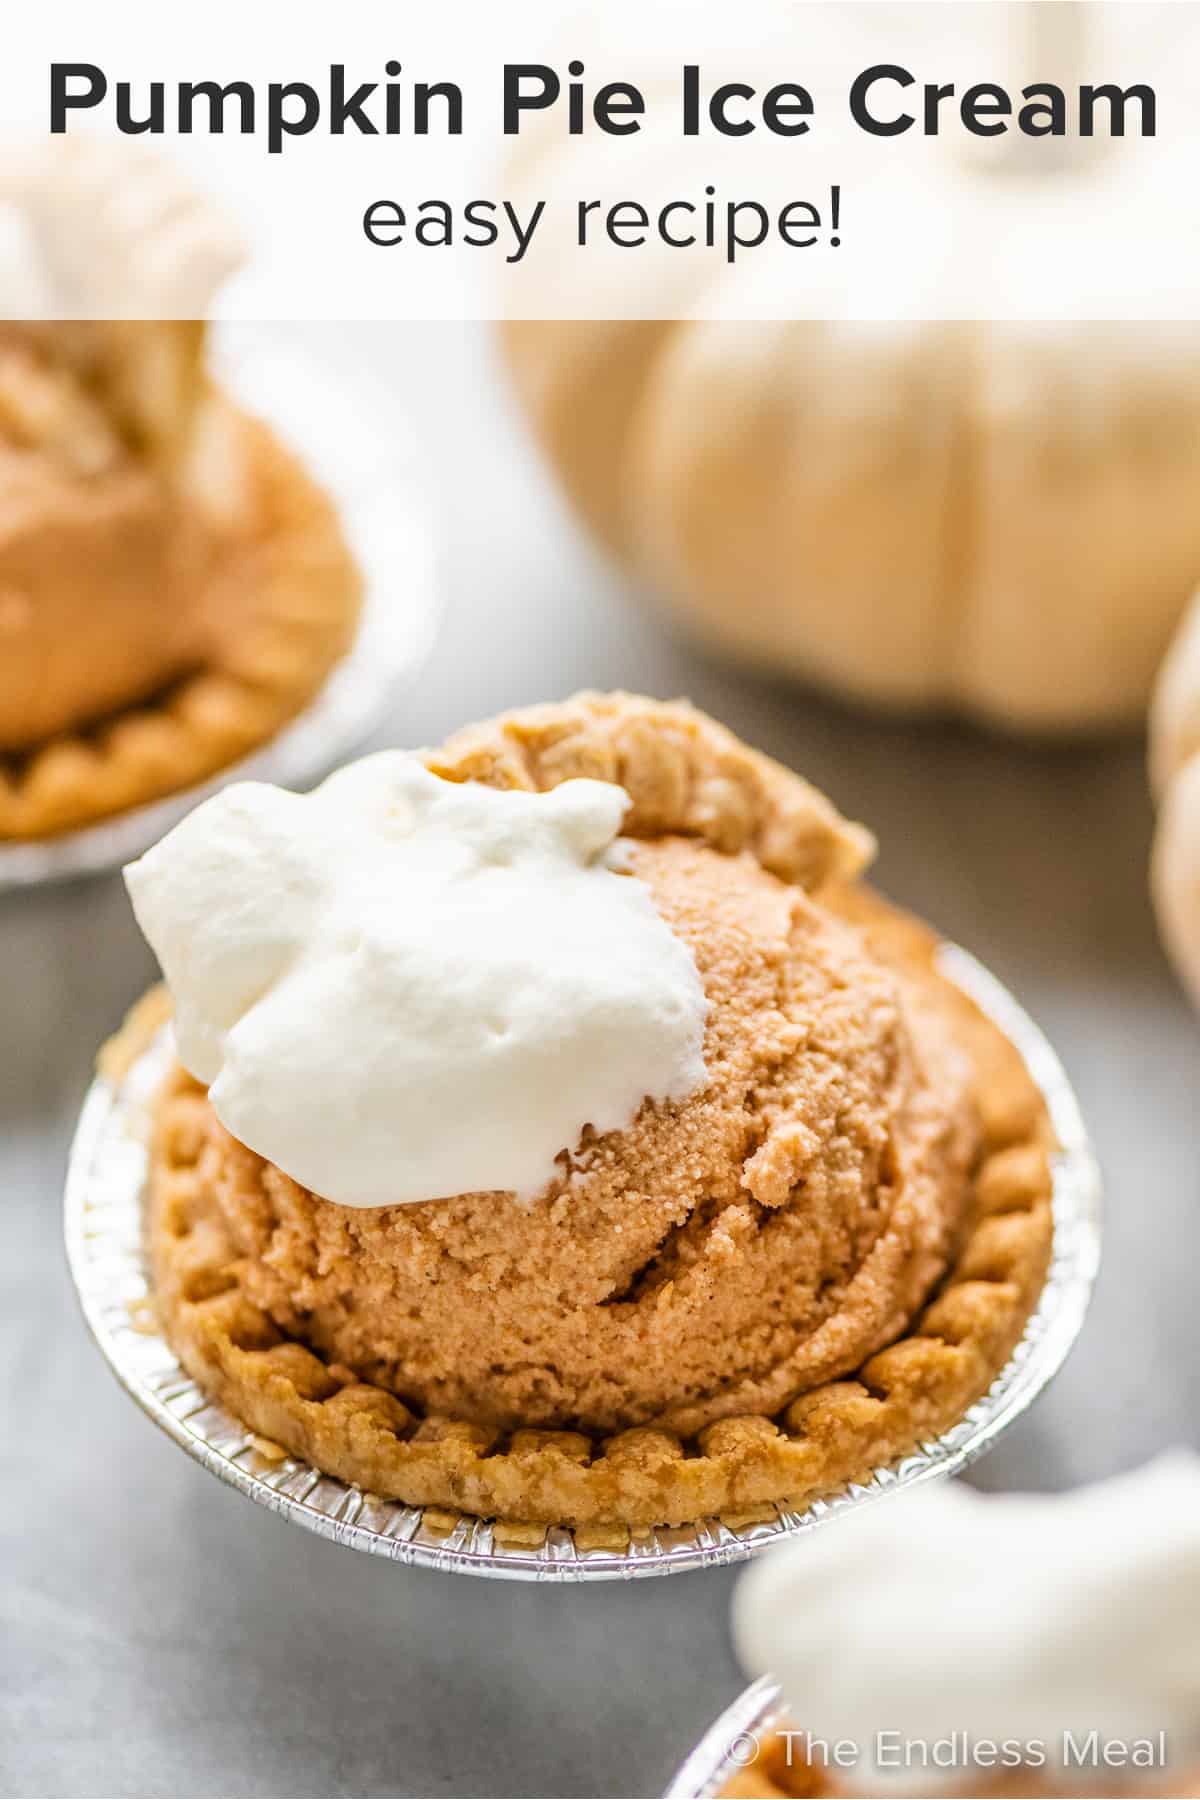 Pumpkin Pie Ice Cream in tart shells with white pumpkins in the background and the recipe title on top of the pciture.